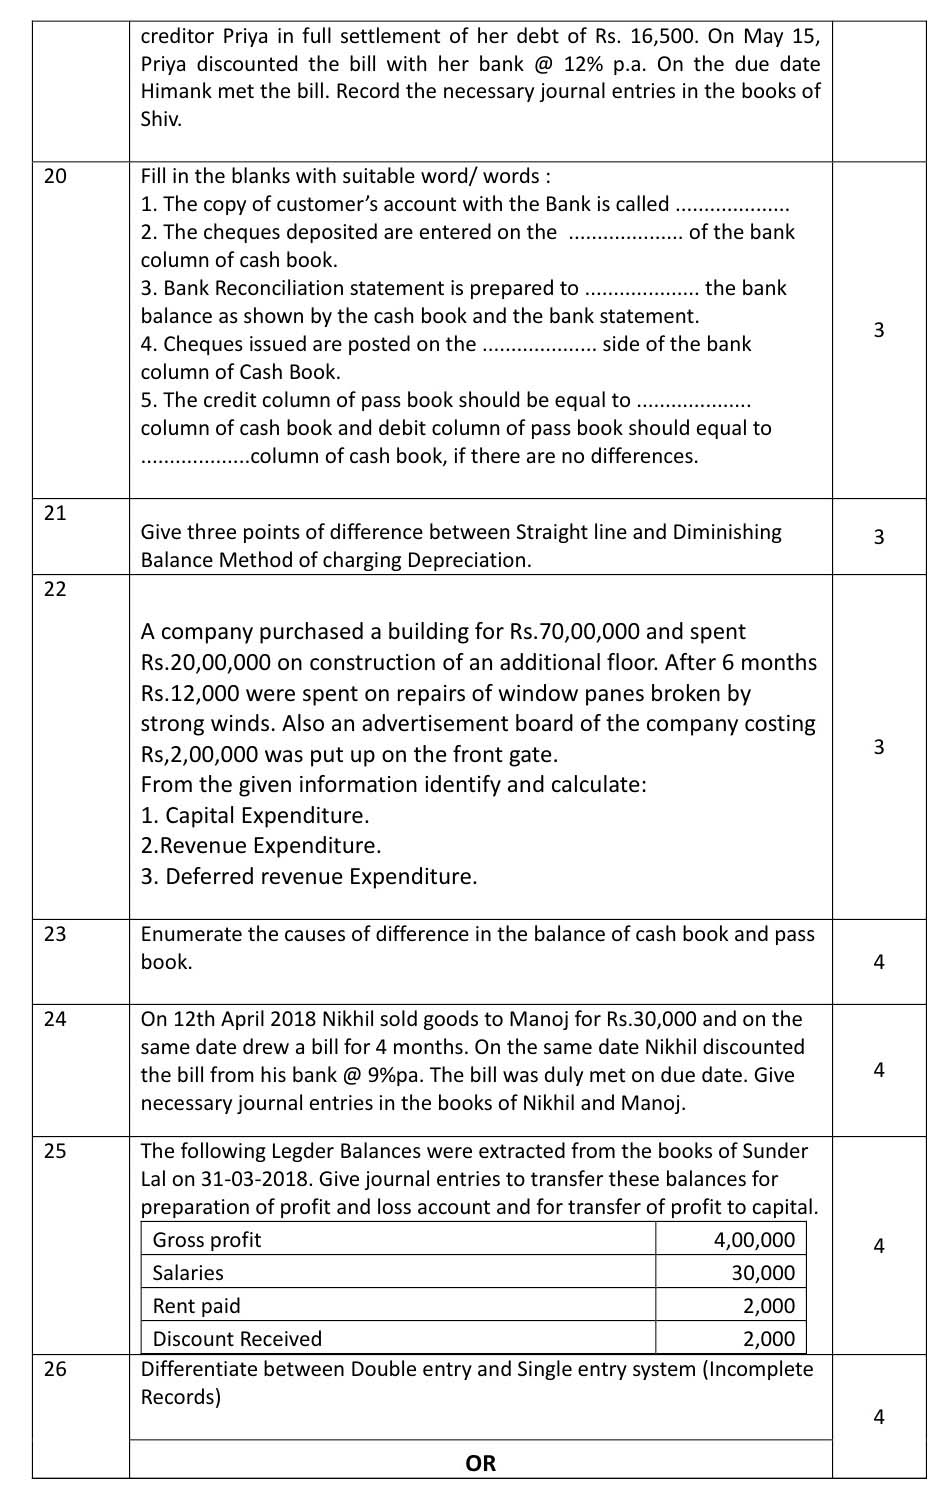 Elements of Book Keeping And Accountancy CBSE Class X Sample Question Paper 2018-19 - Image 4